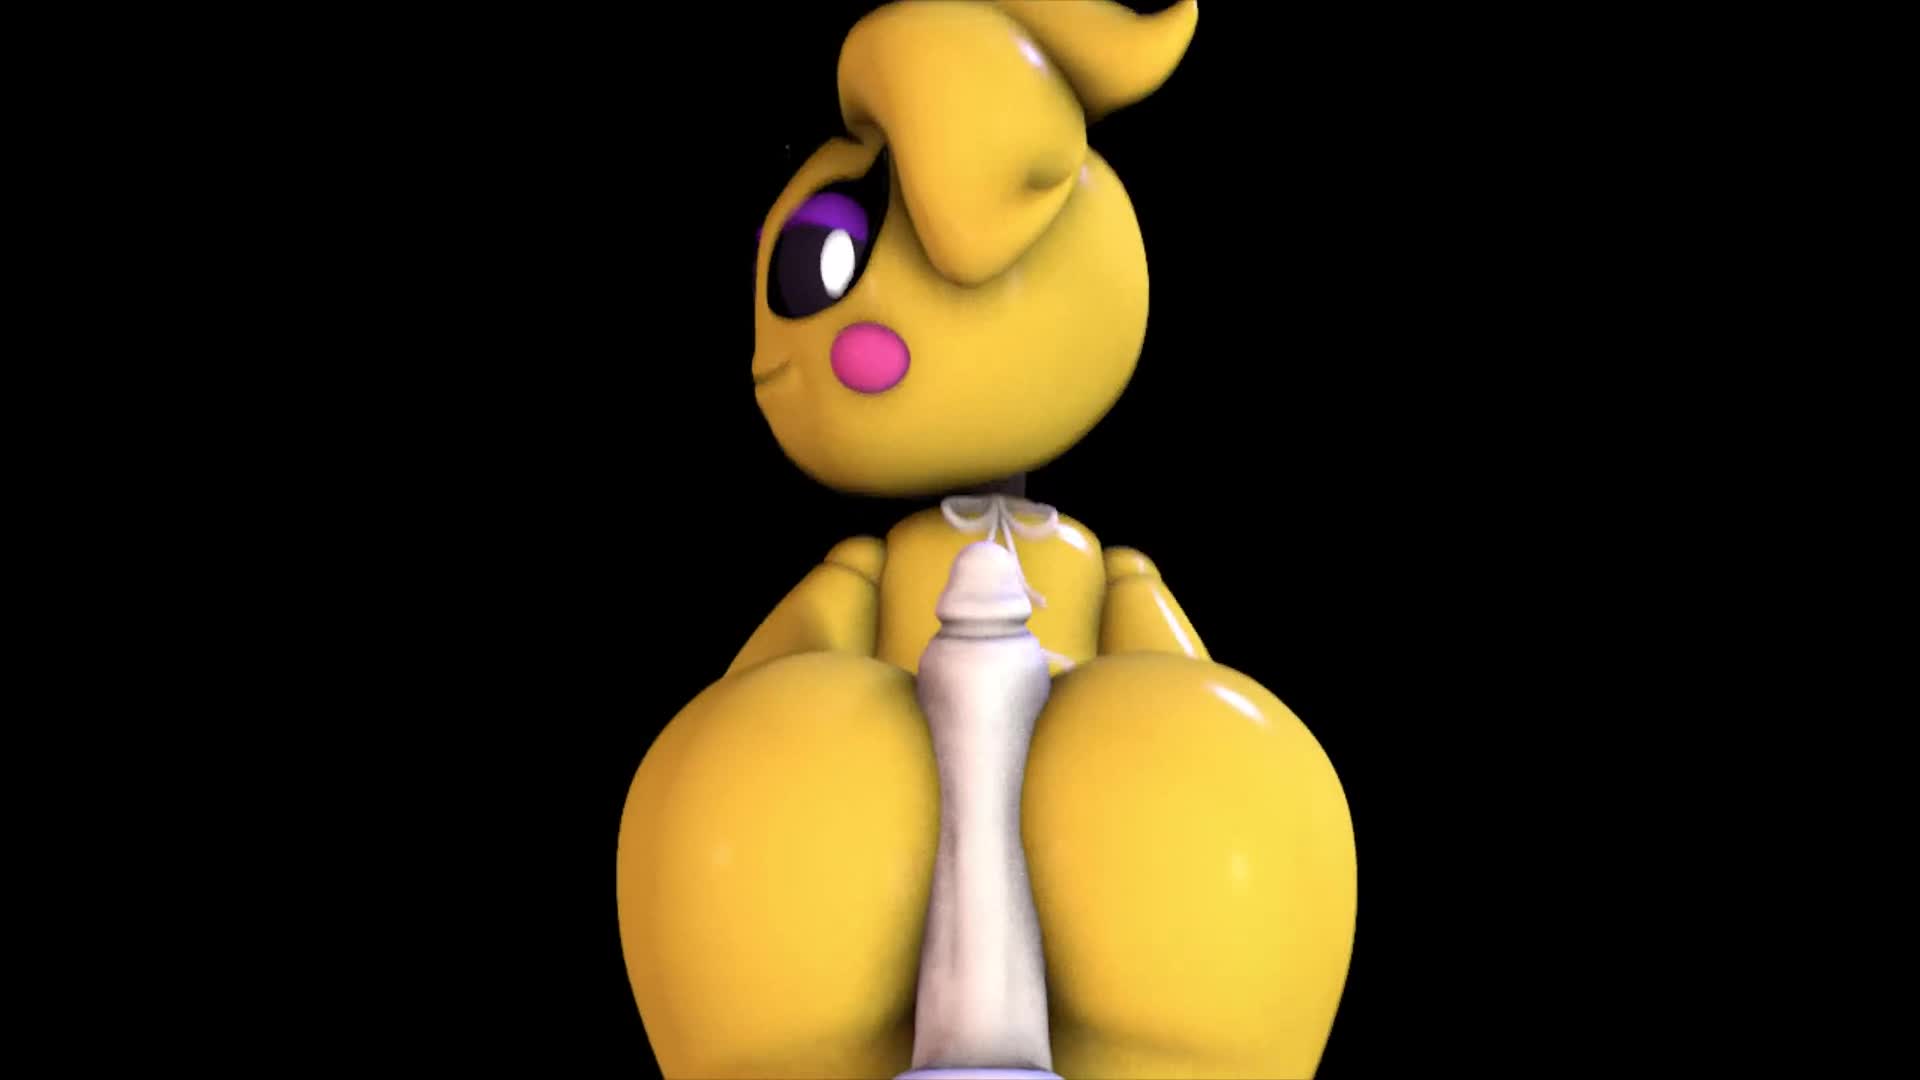 Toy Chica (fnaf) Buttjob Animated - Unsorted Videos R34 Webm Animation. fre...